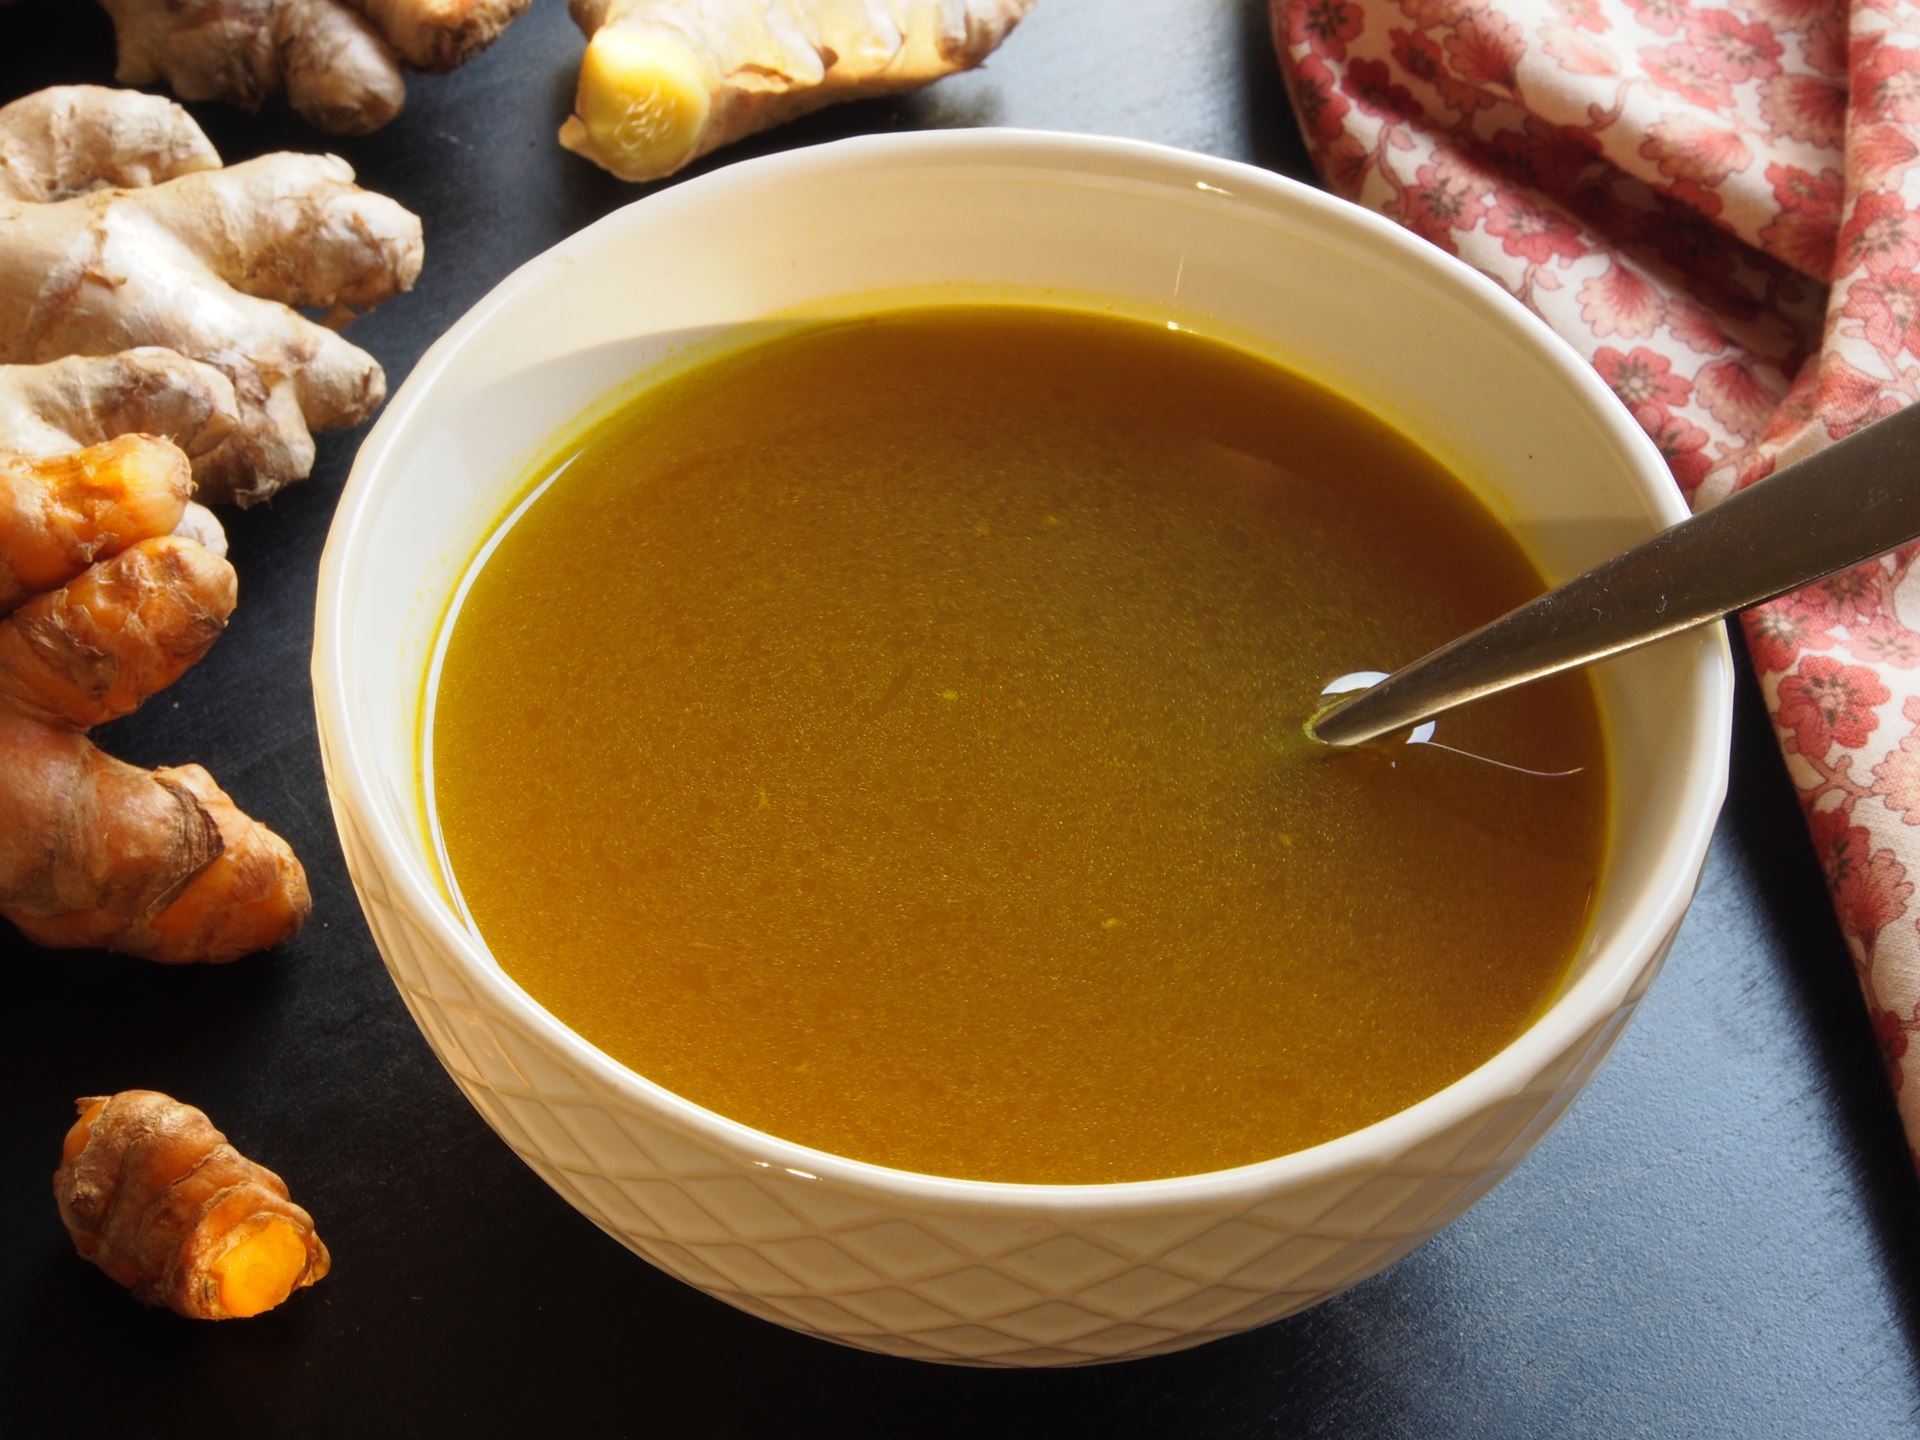 Picture of Ginger-Turmeric Infused Chicken Broth - 22 oz